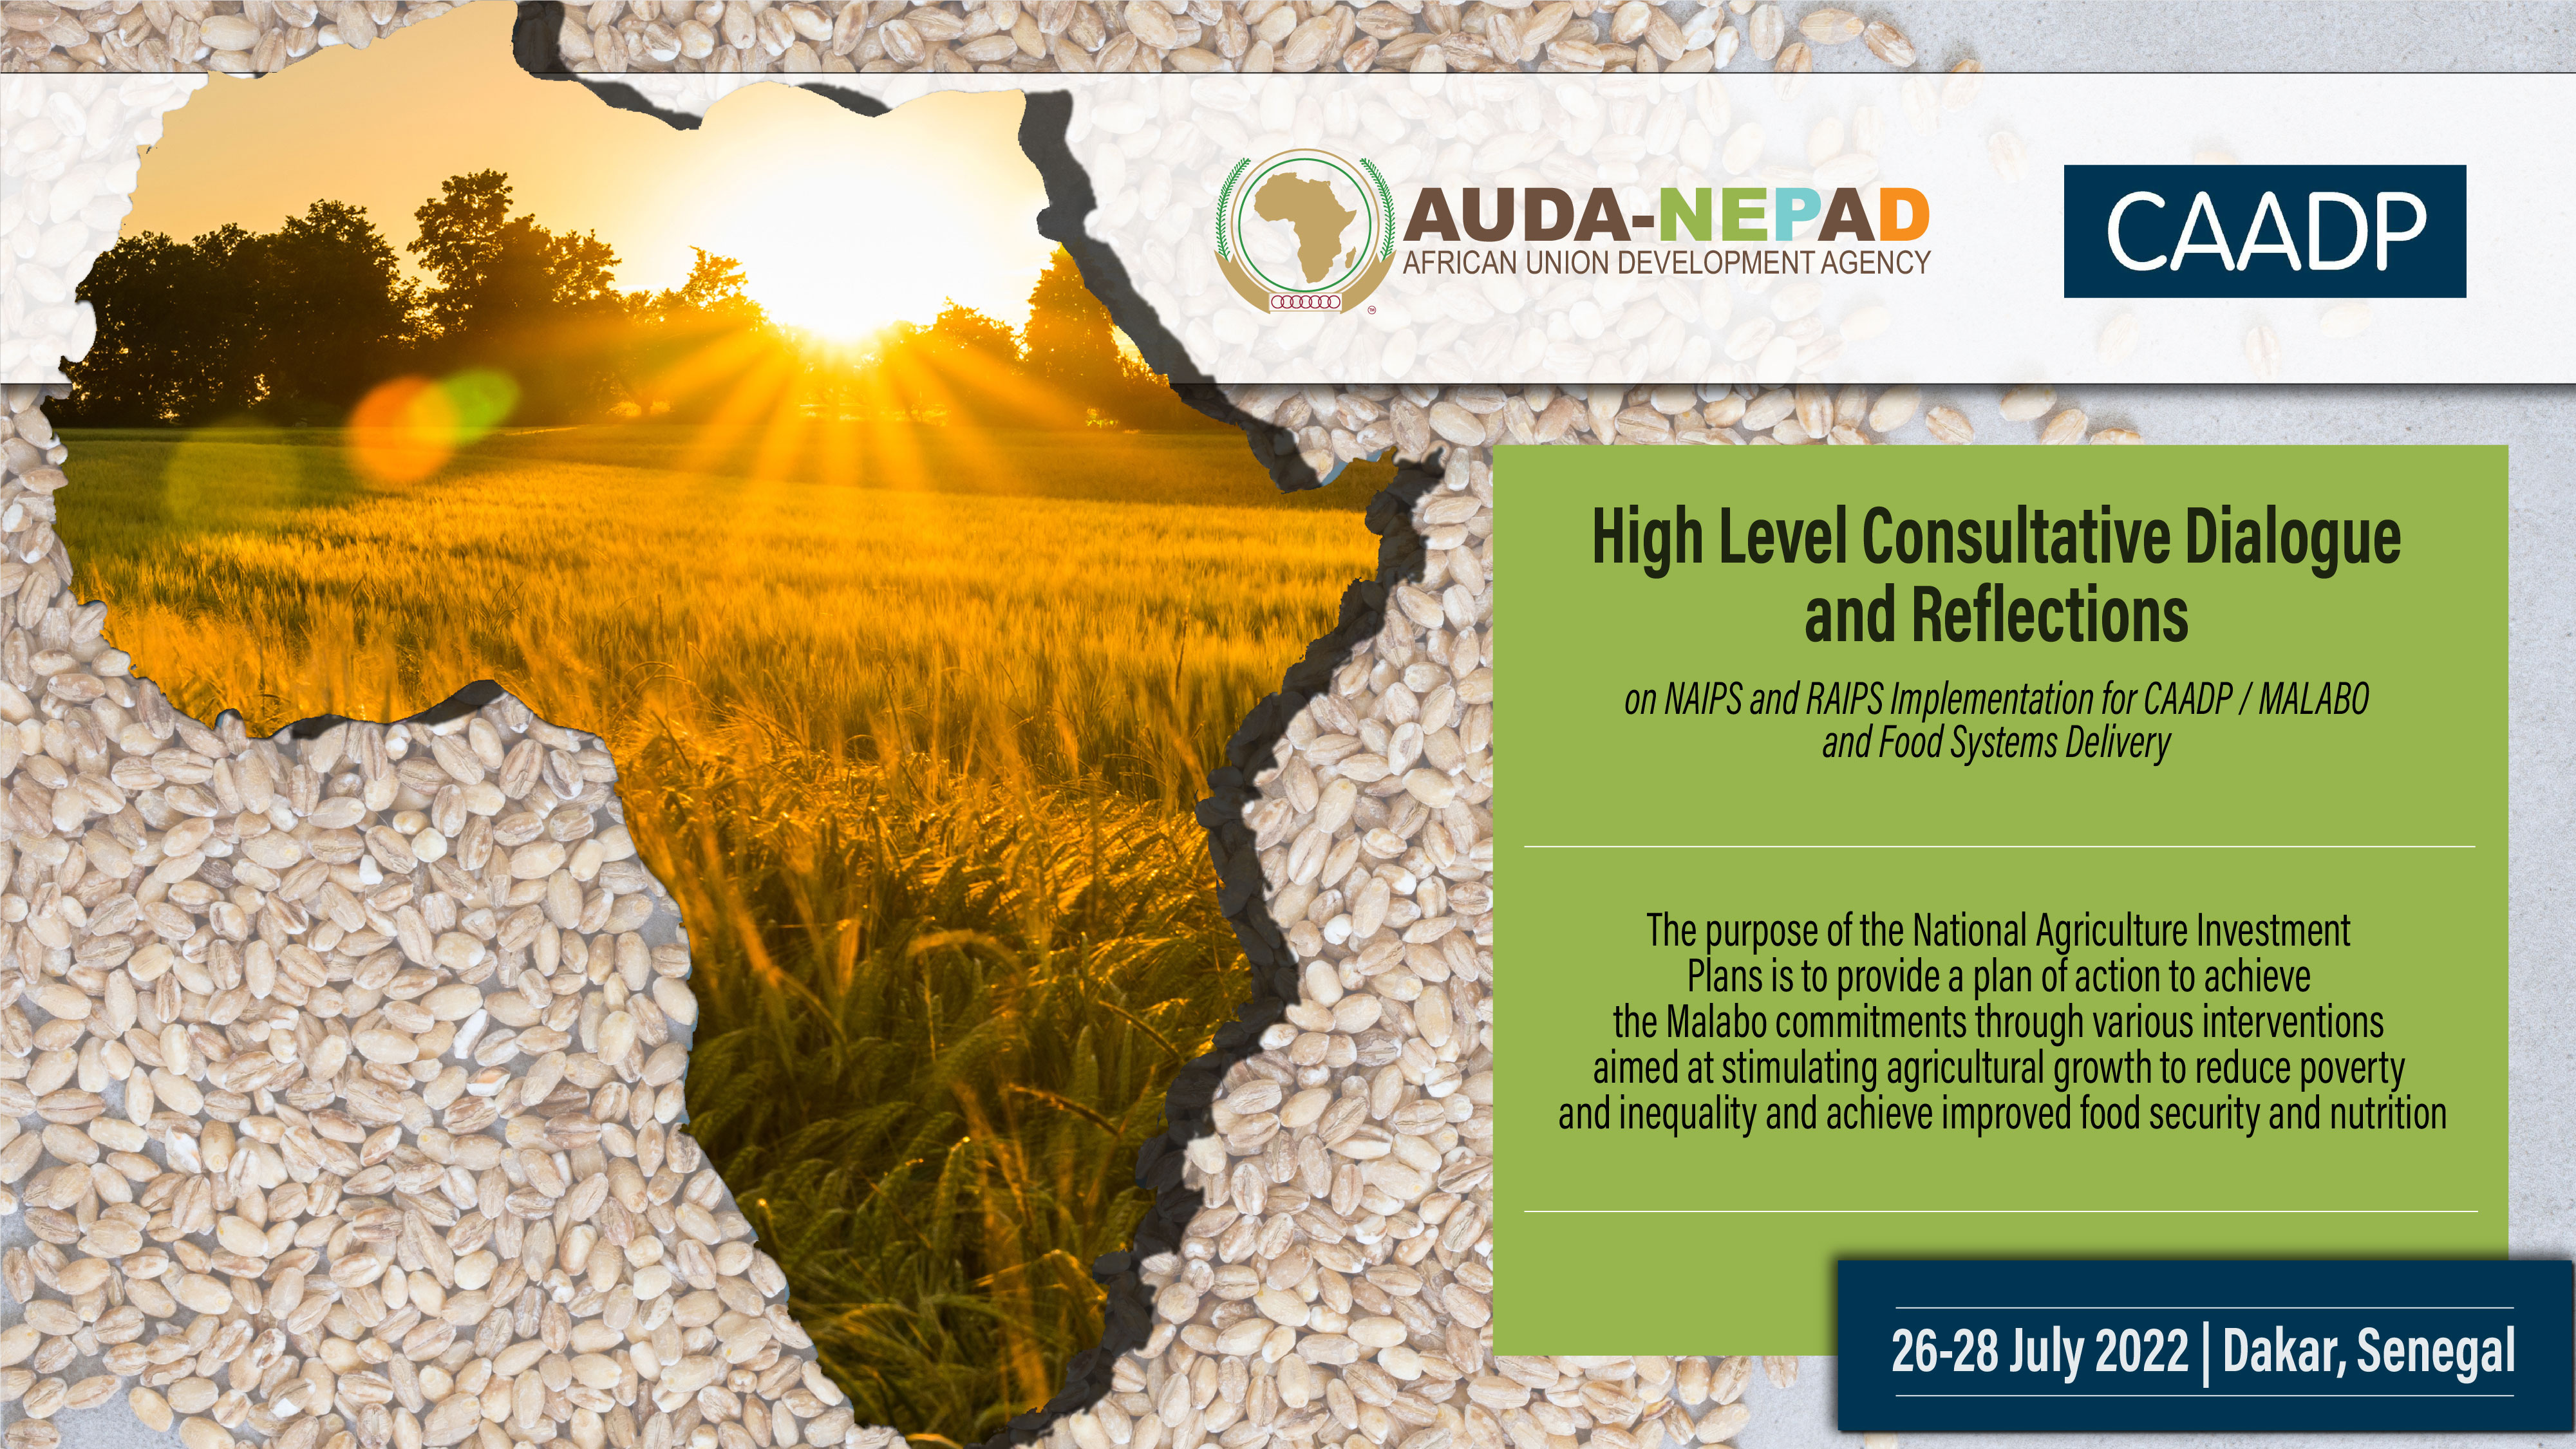 CAADP Key Messages 4